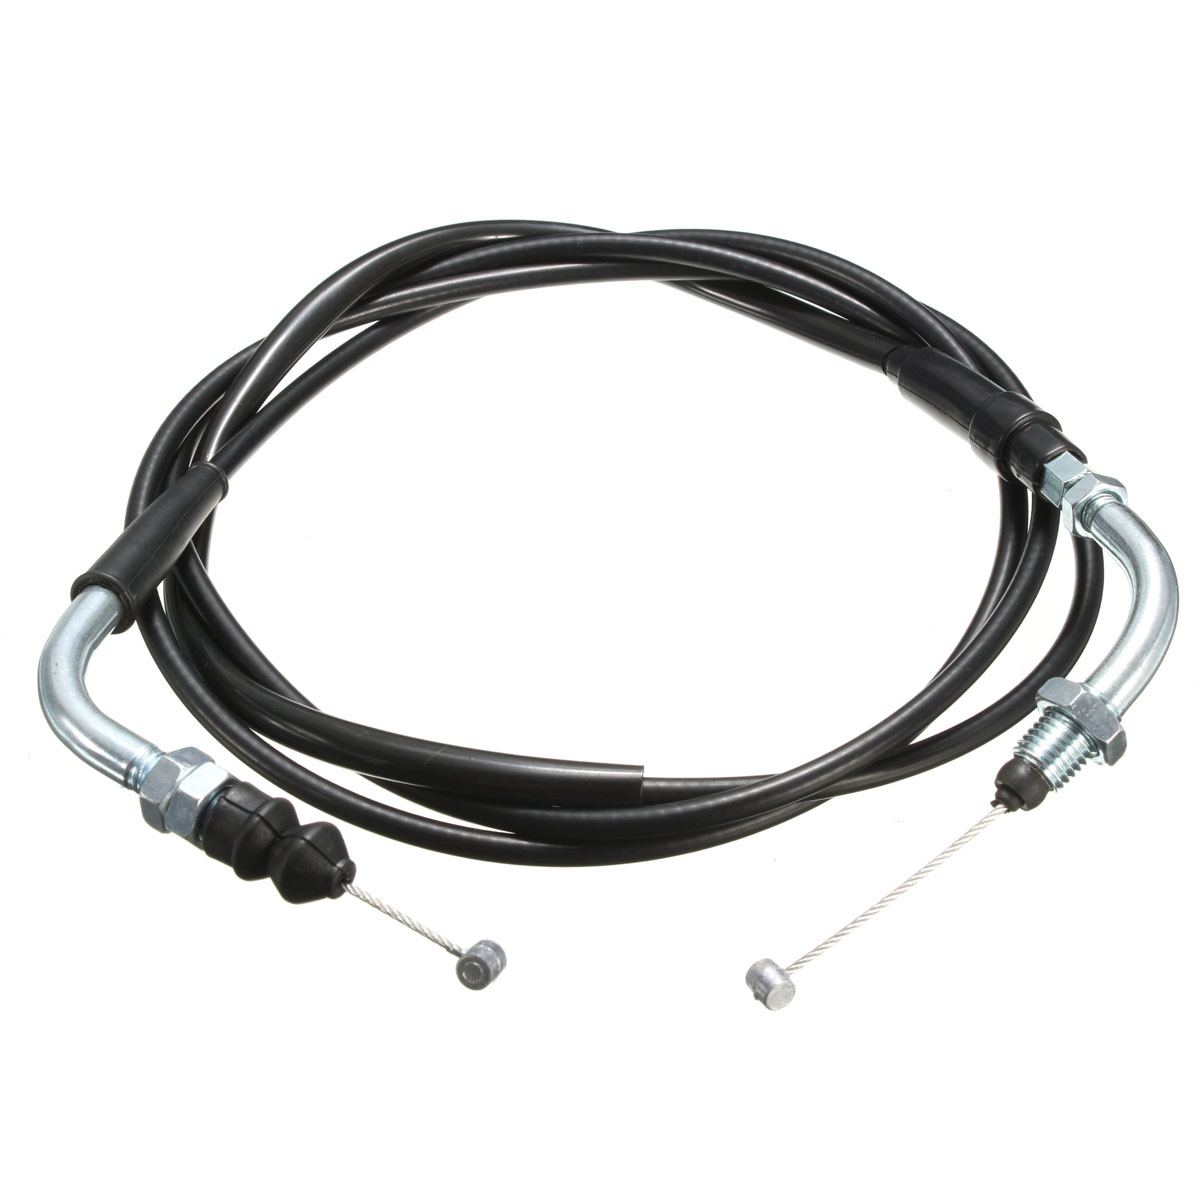 

Throttle Cable For 49cc 50cc 125cc 150cc Chinese Scooter Moped